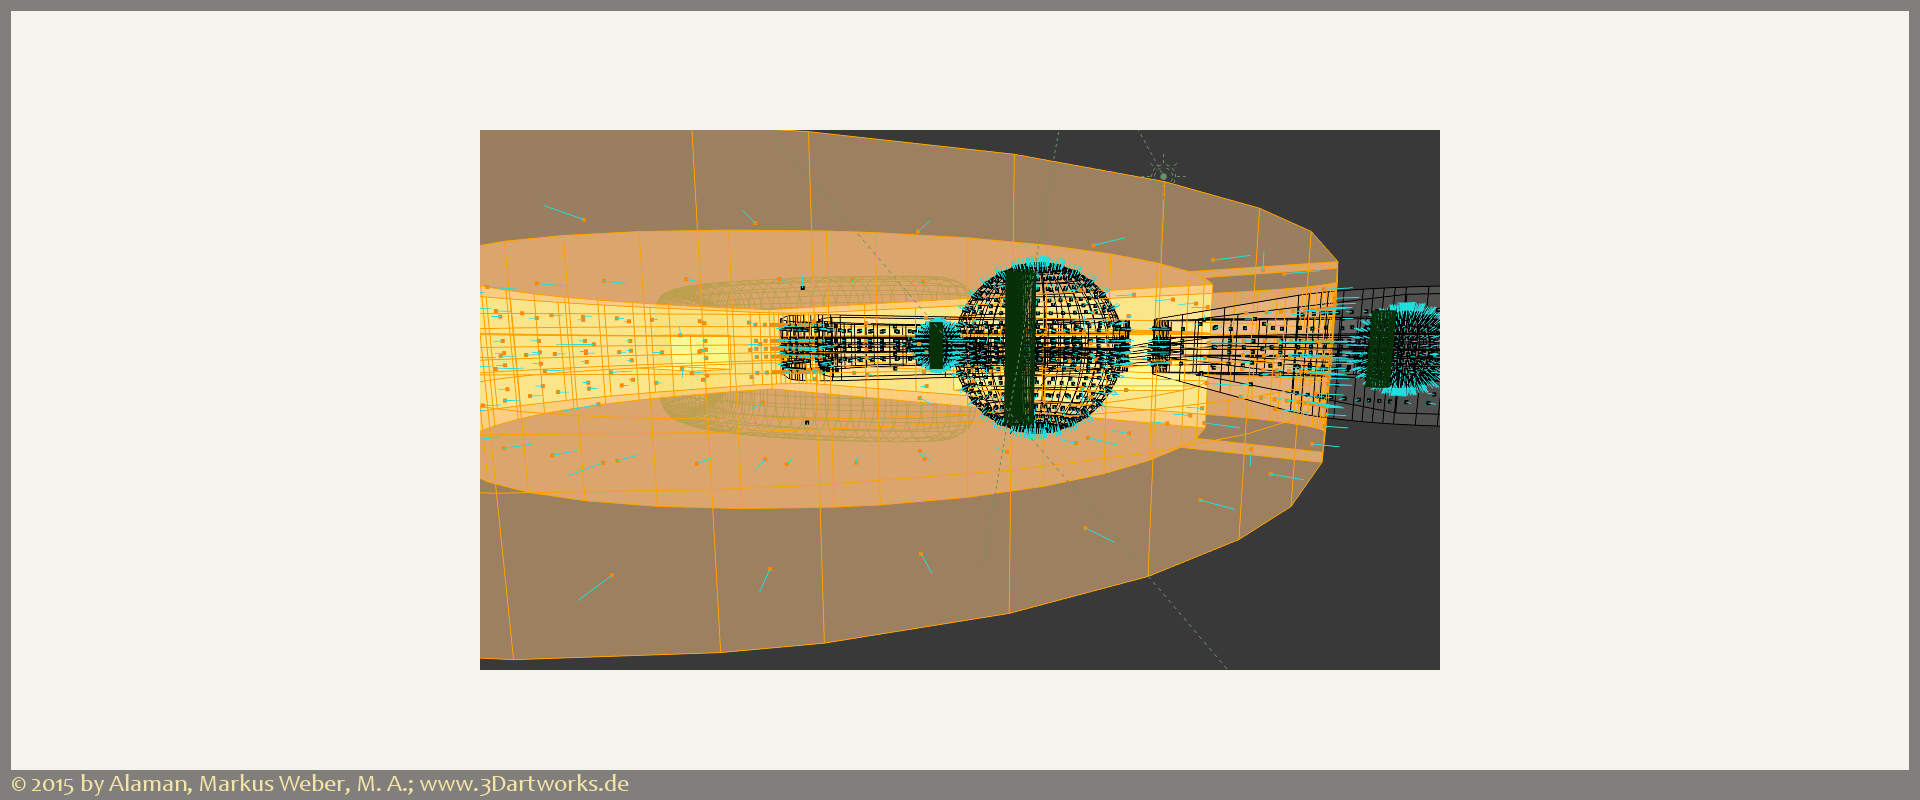 Work in progress at Alaman 3D Artworks: product visualization, work on the Alaman 3D Artworks spaceship.